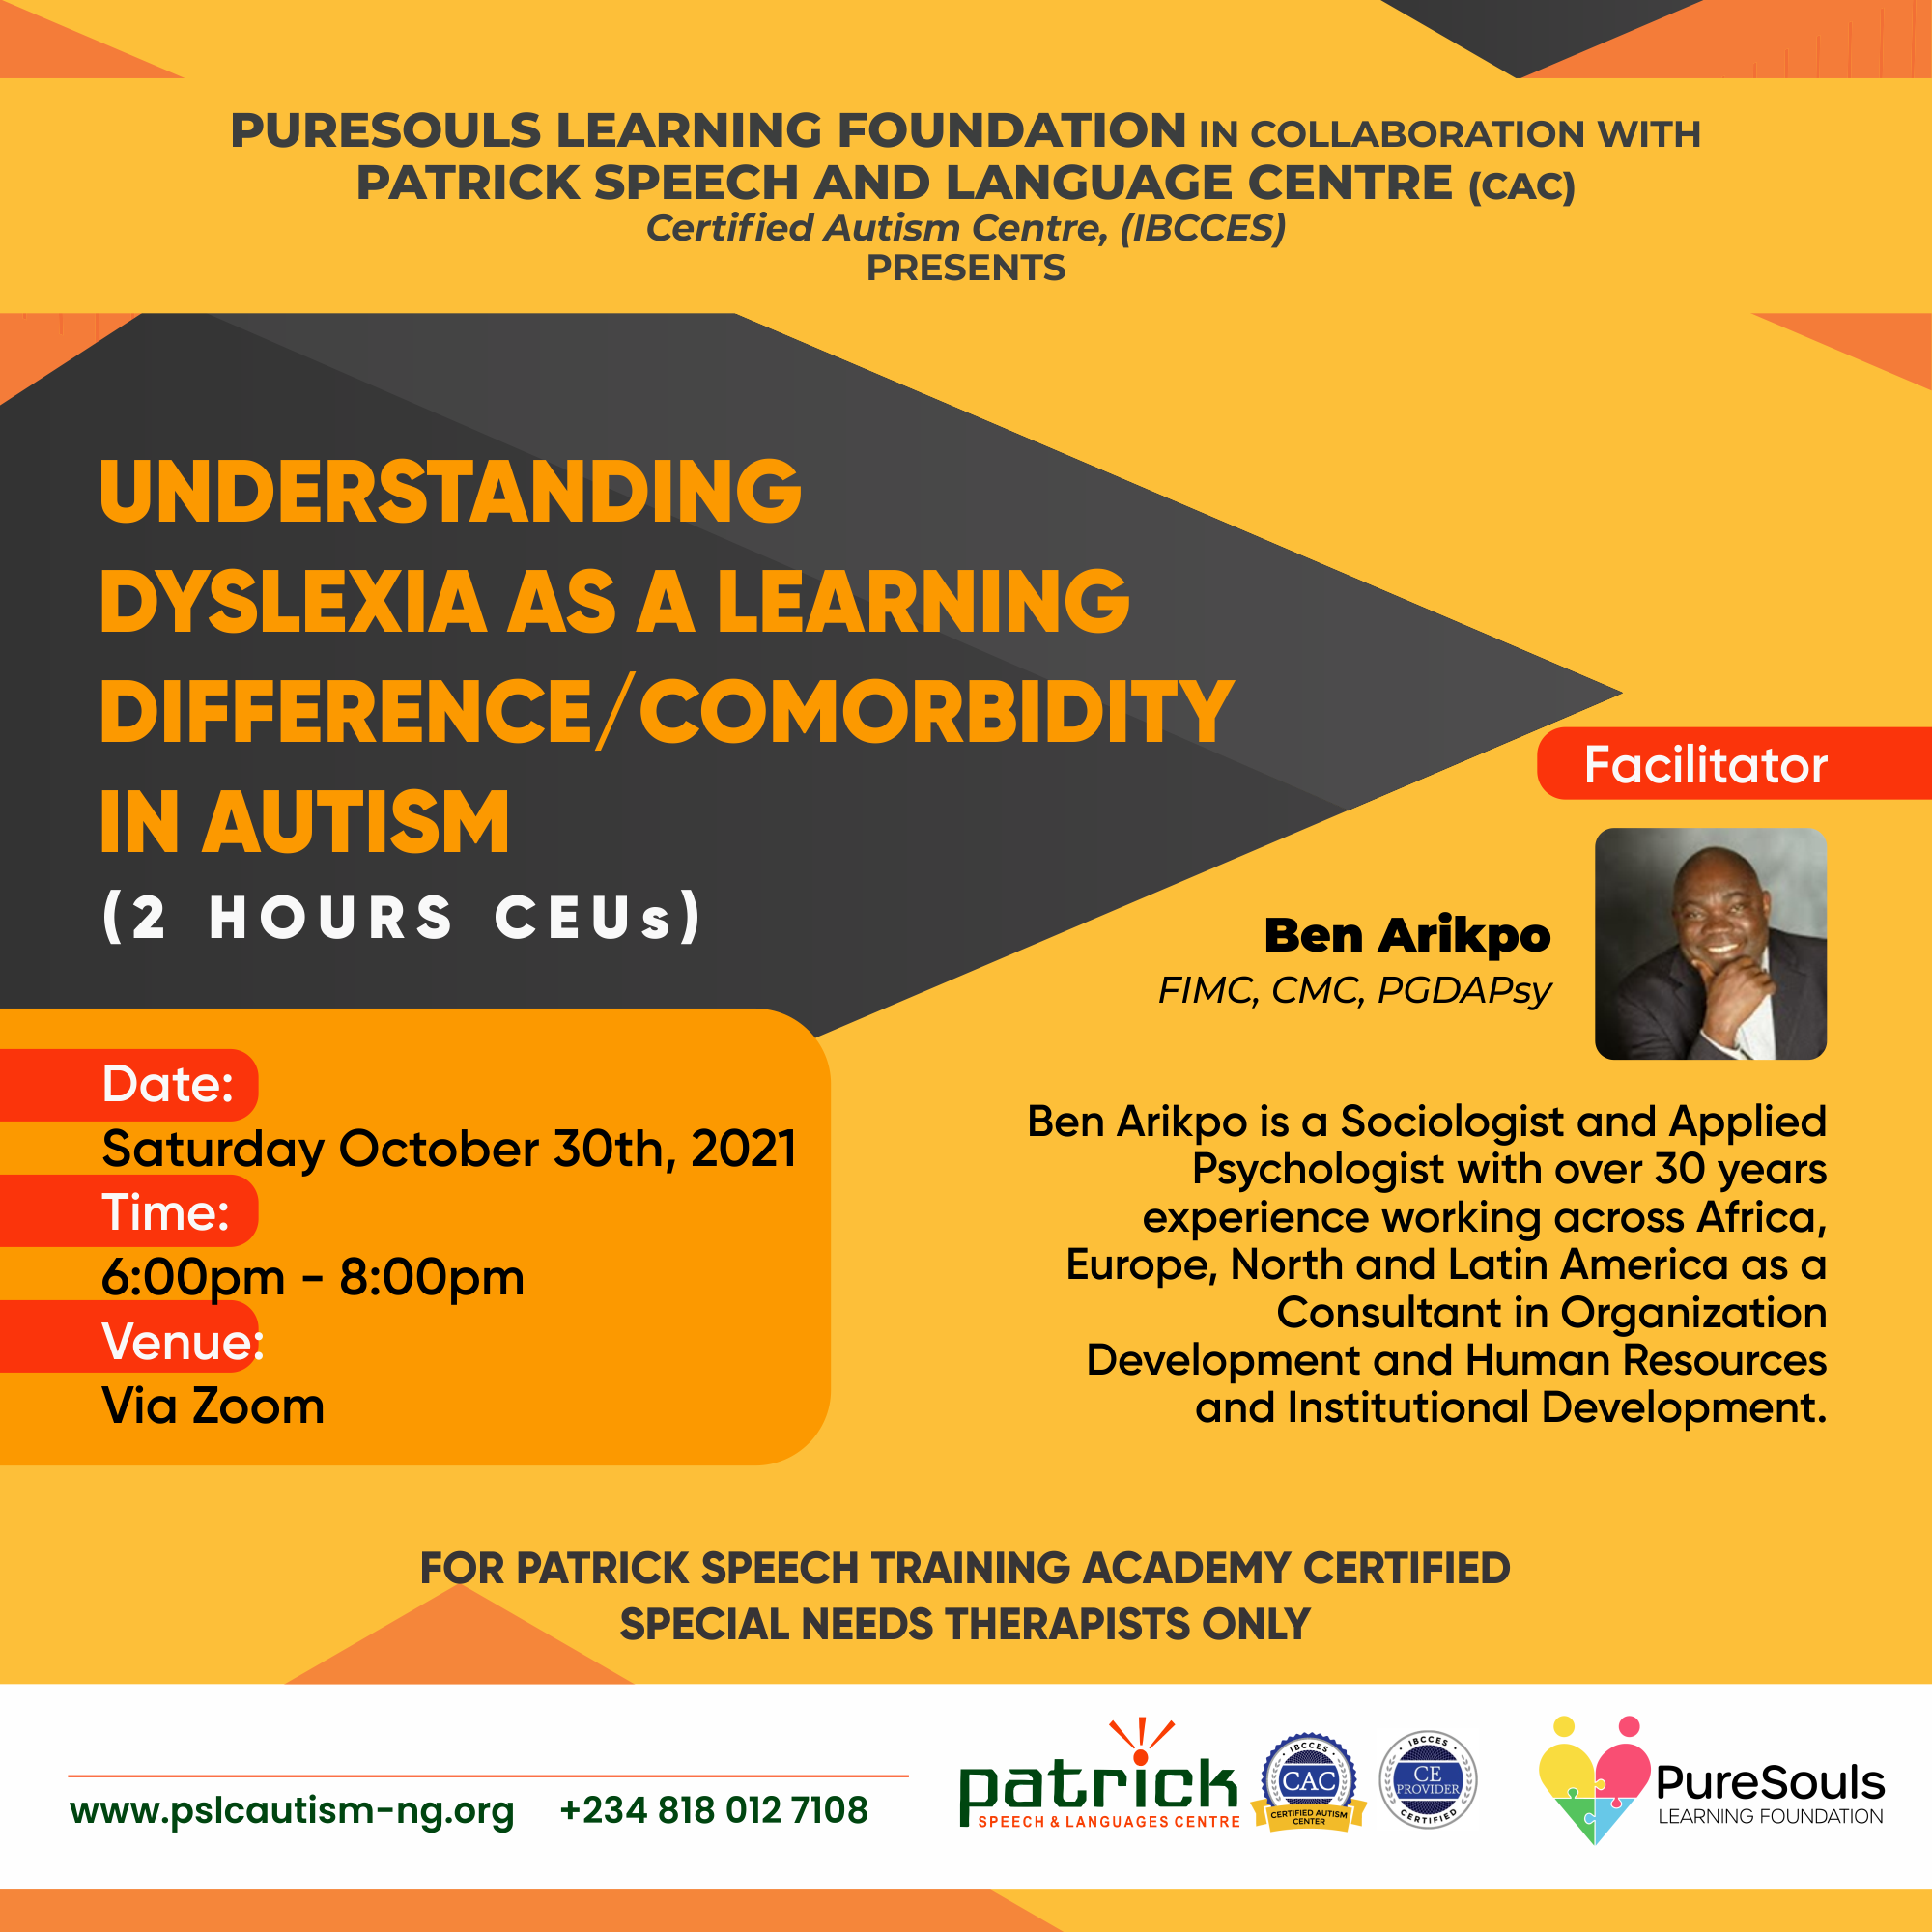 Understanding Dyslexia as a Learning Difference/Comorbidity in Autism